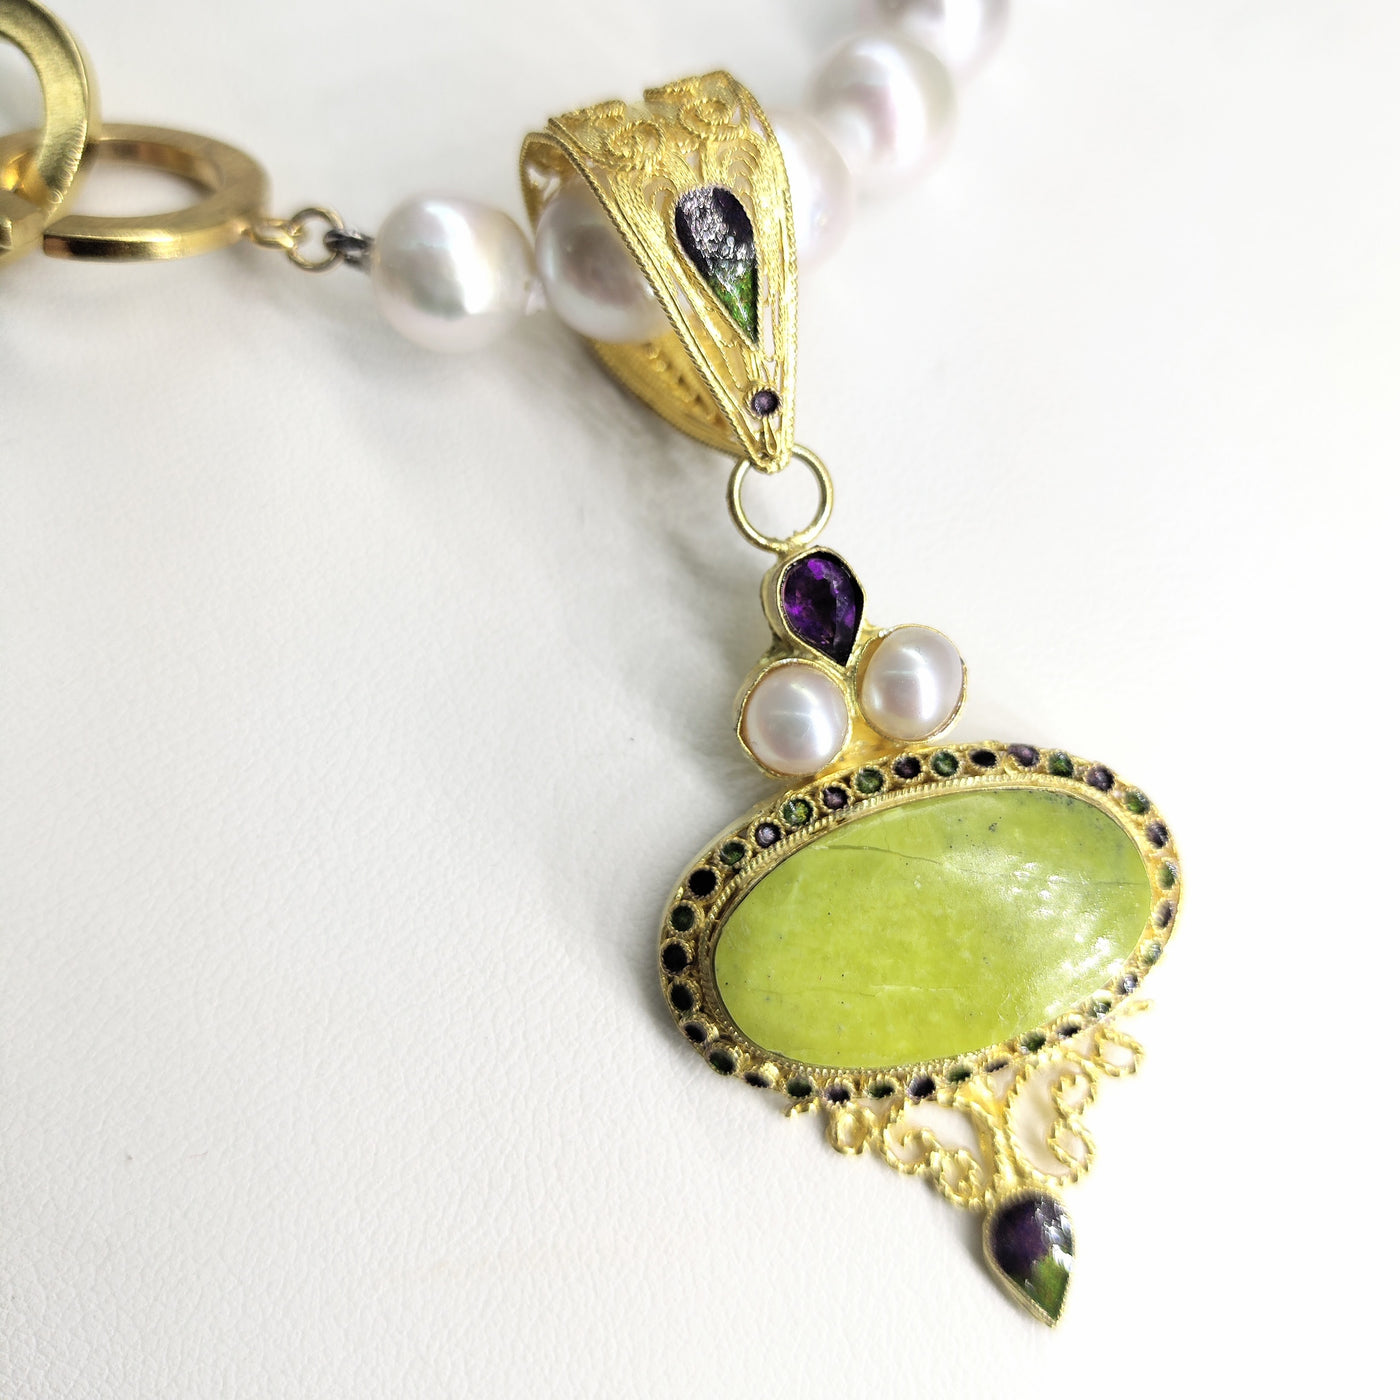 "The Lady-Qing" Pendant Necklace - Gaspeite, Amethyst, Pearls, Enamel, Gold Sterling